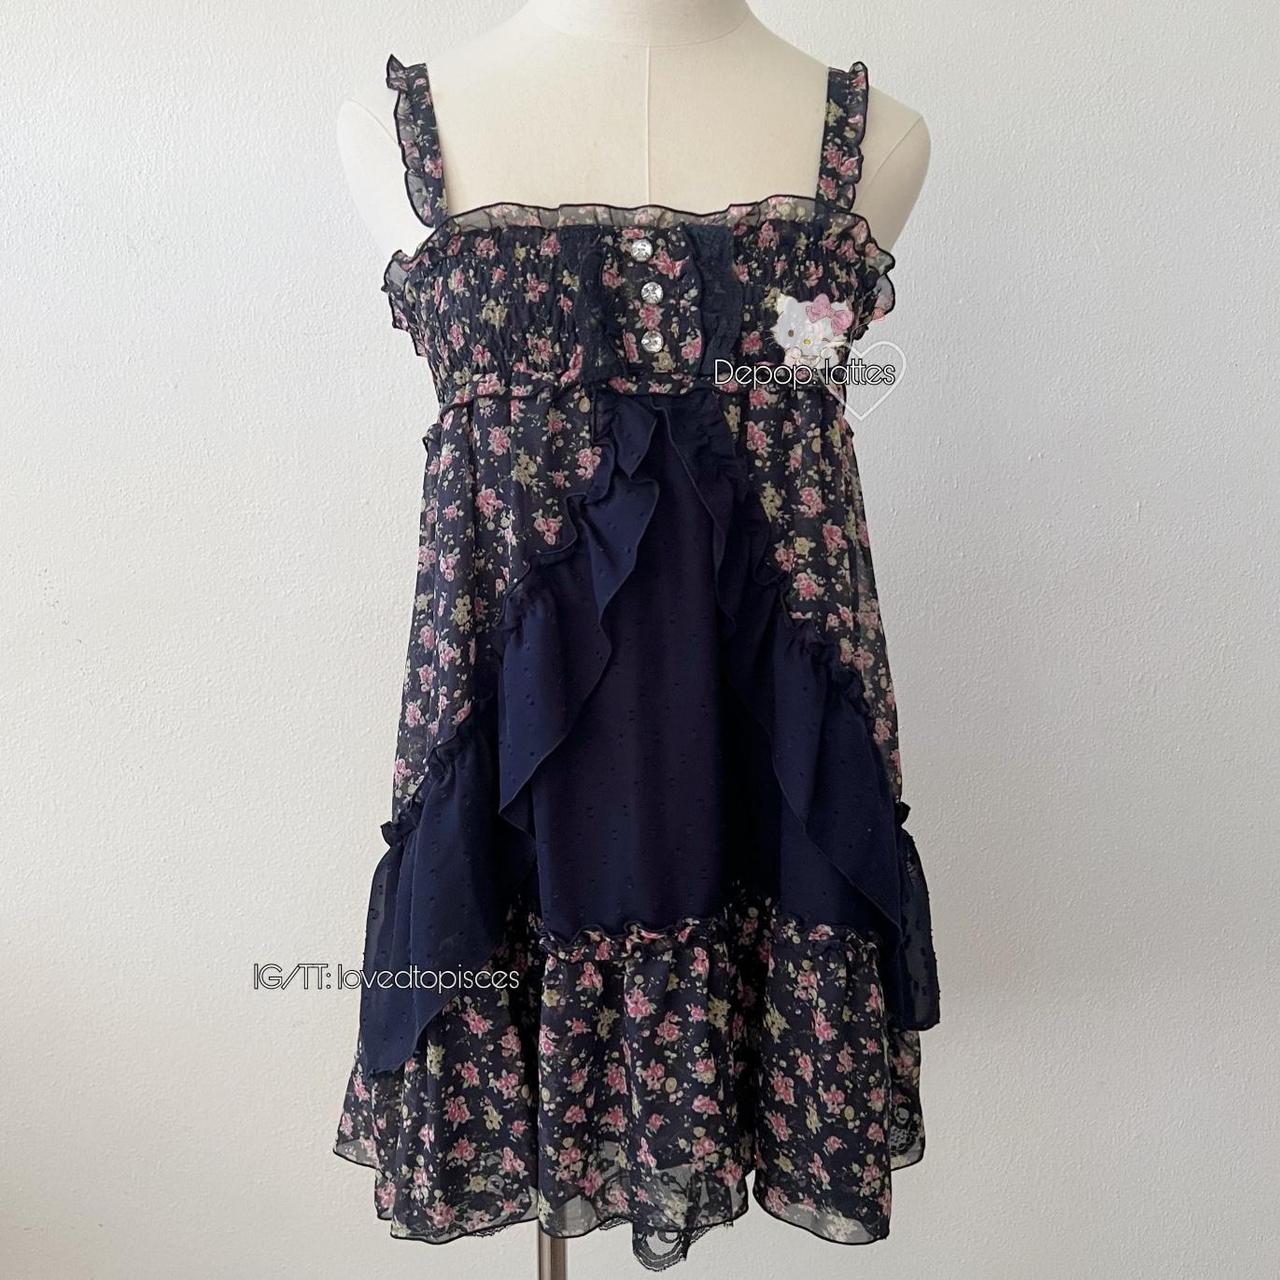 Floral milkmaid babydoll lace ruffle strapless dress... - Depop